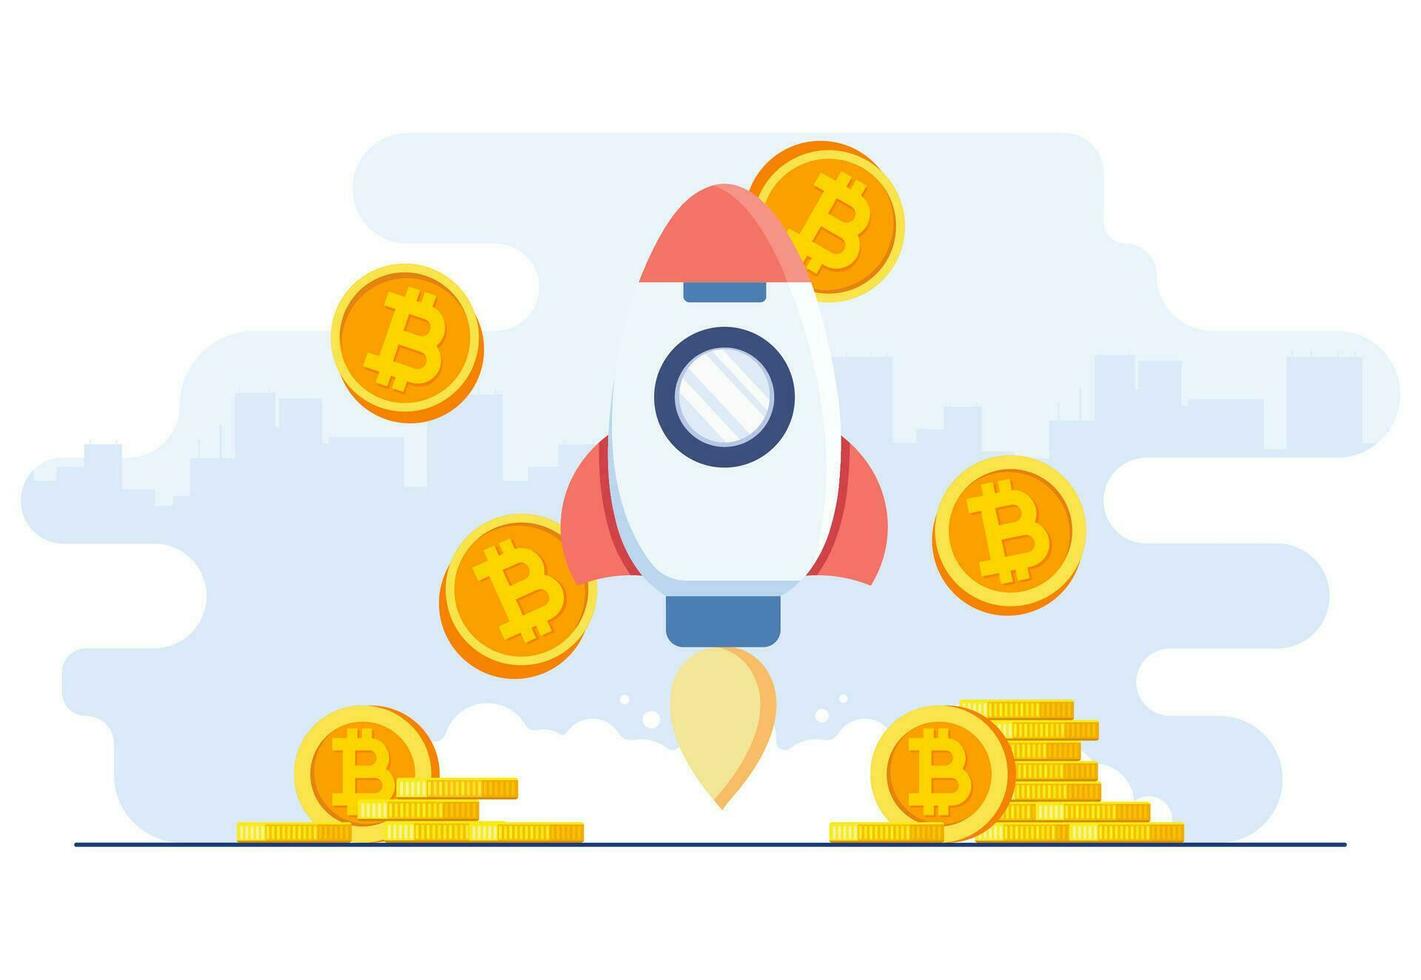 Rocket successfully taking off, Virtual money capitalization rise, Bull market concept, Growing bitcoin, Blockchain technology, Cryptocurrency, Digital money cryptocurrency trading vector